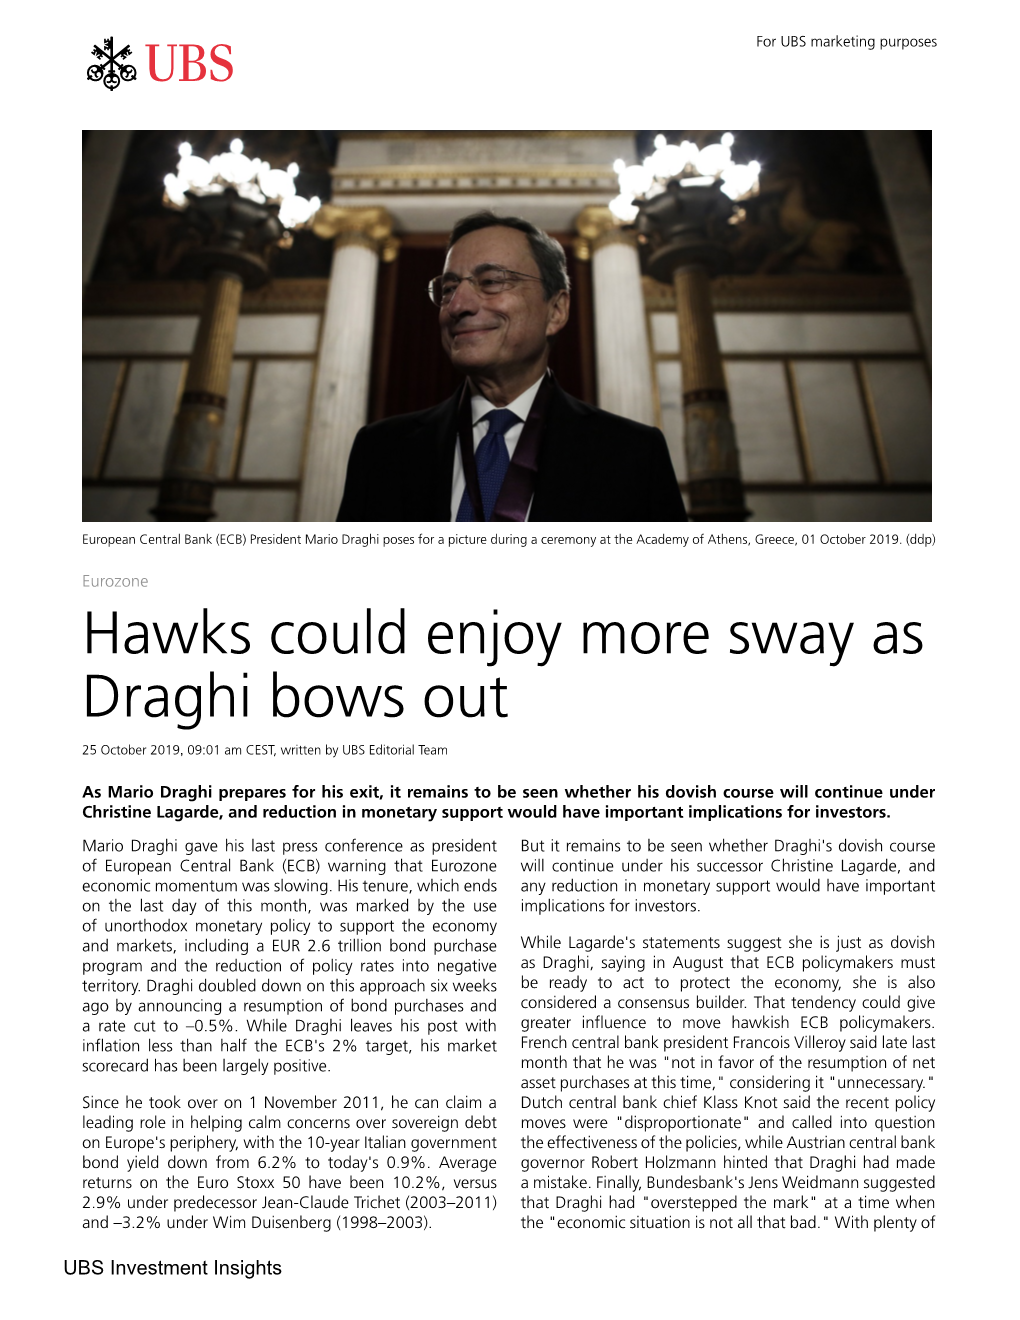 Hawks Could Enjoy More Sway As Draghi Bows Out